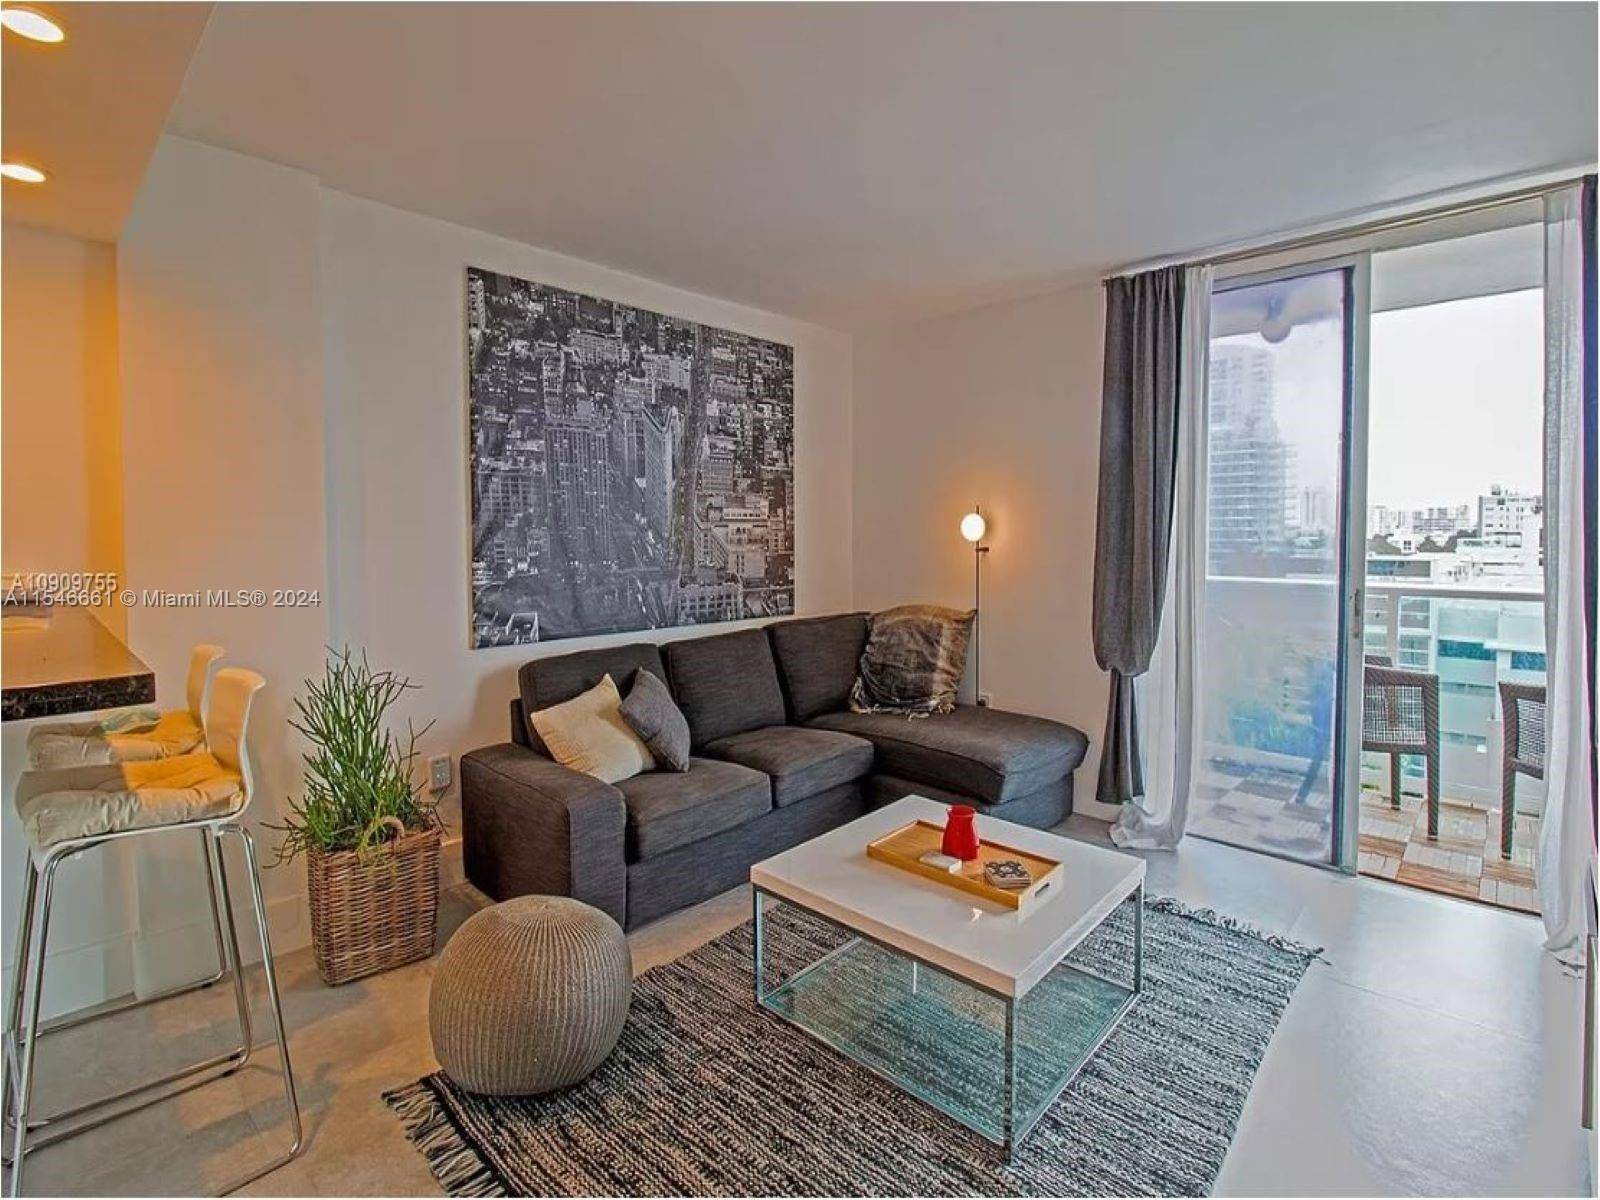 Remodeled 1 bed 1 bath condo at the heart of South Beach on trendy West Avenue part of Mirador with an open balcony.